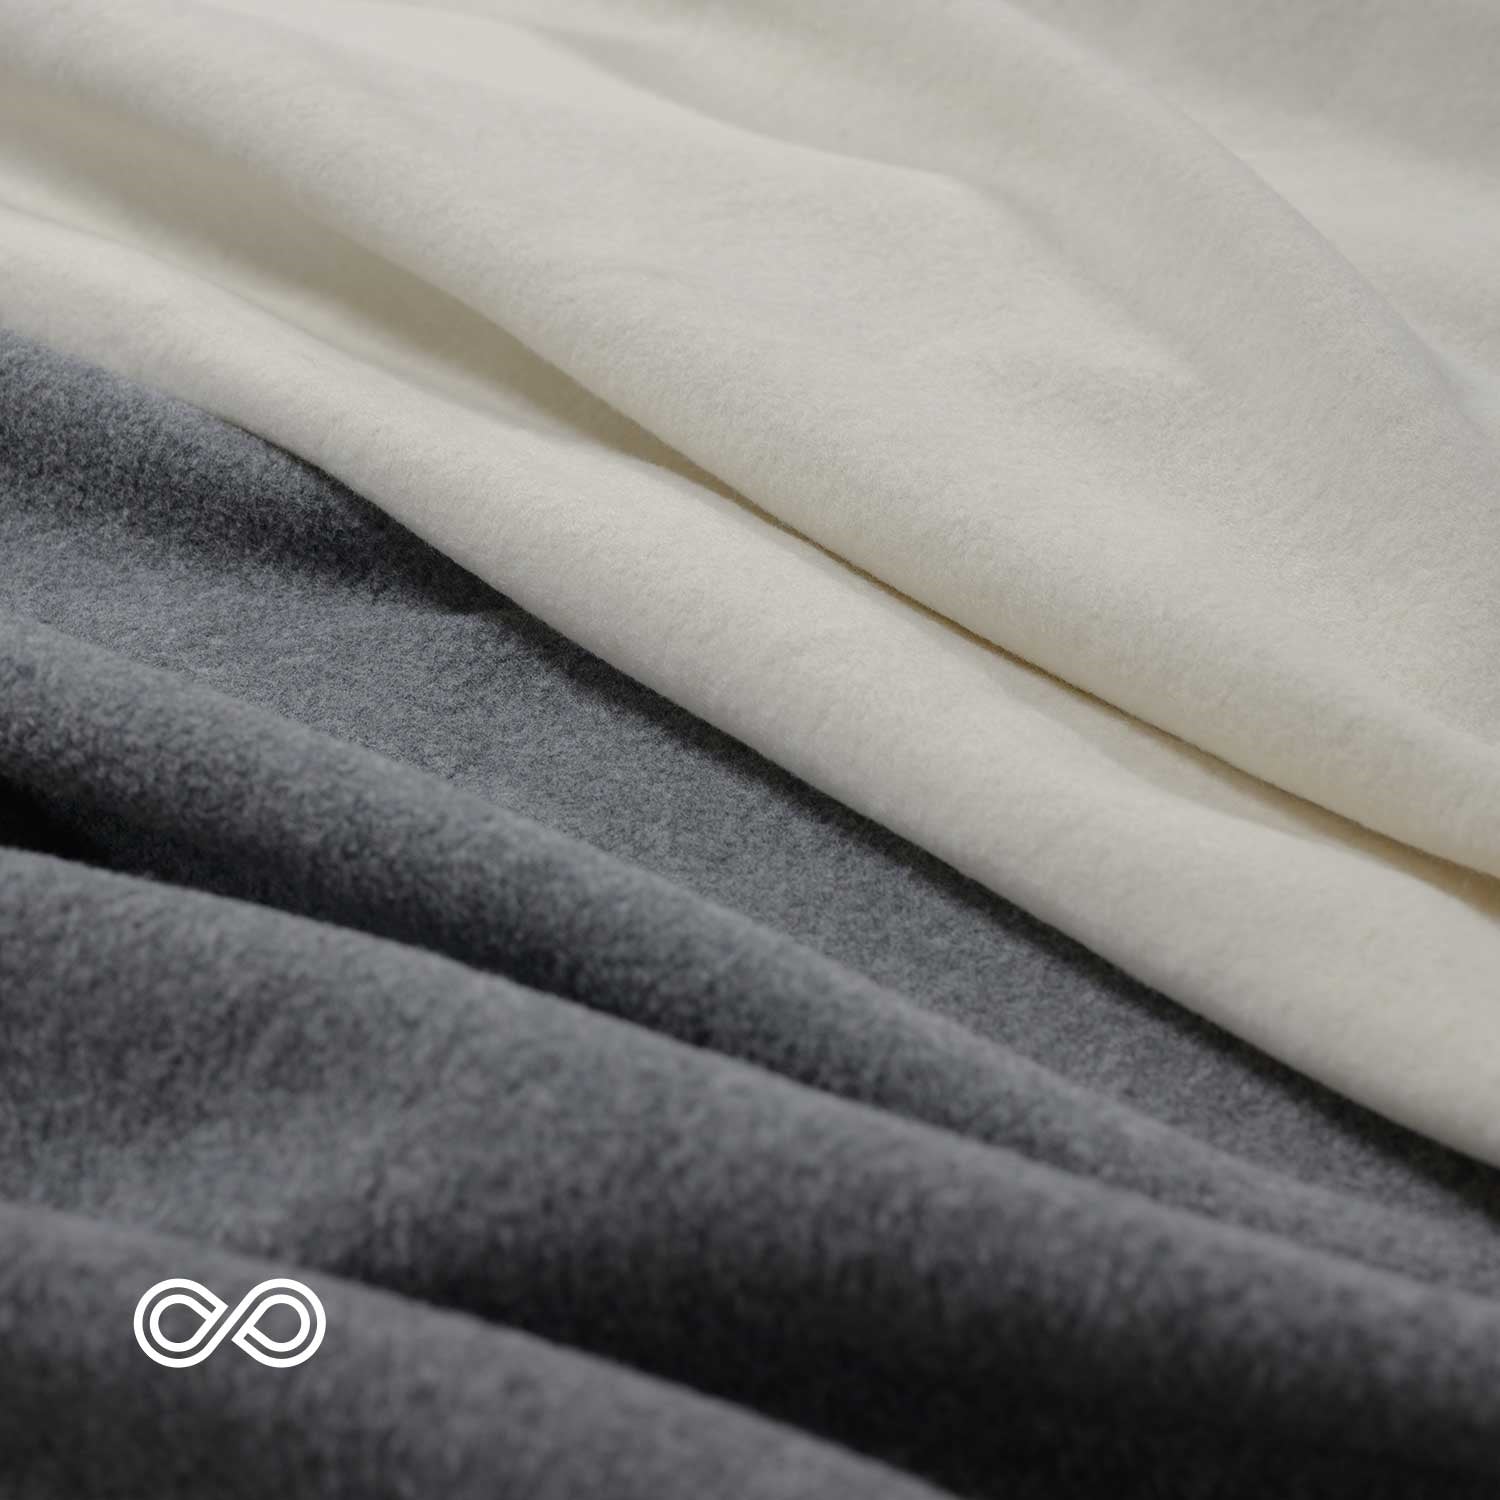 Organic Cotton Fleece Fabric brushed on both sides for softness